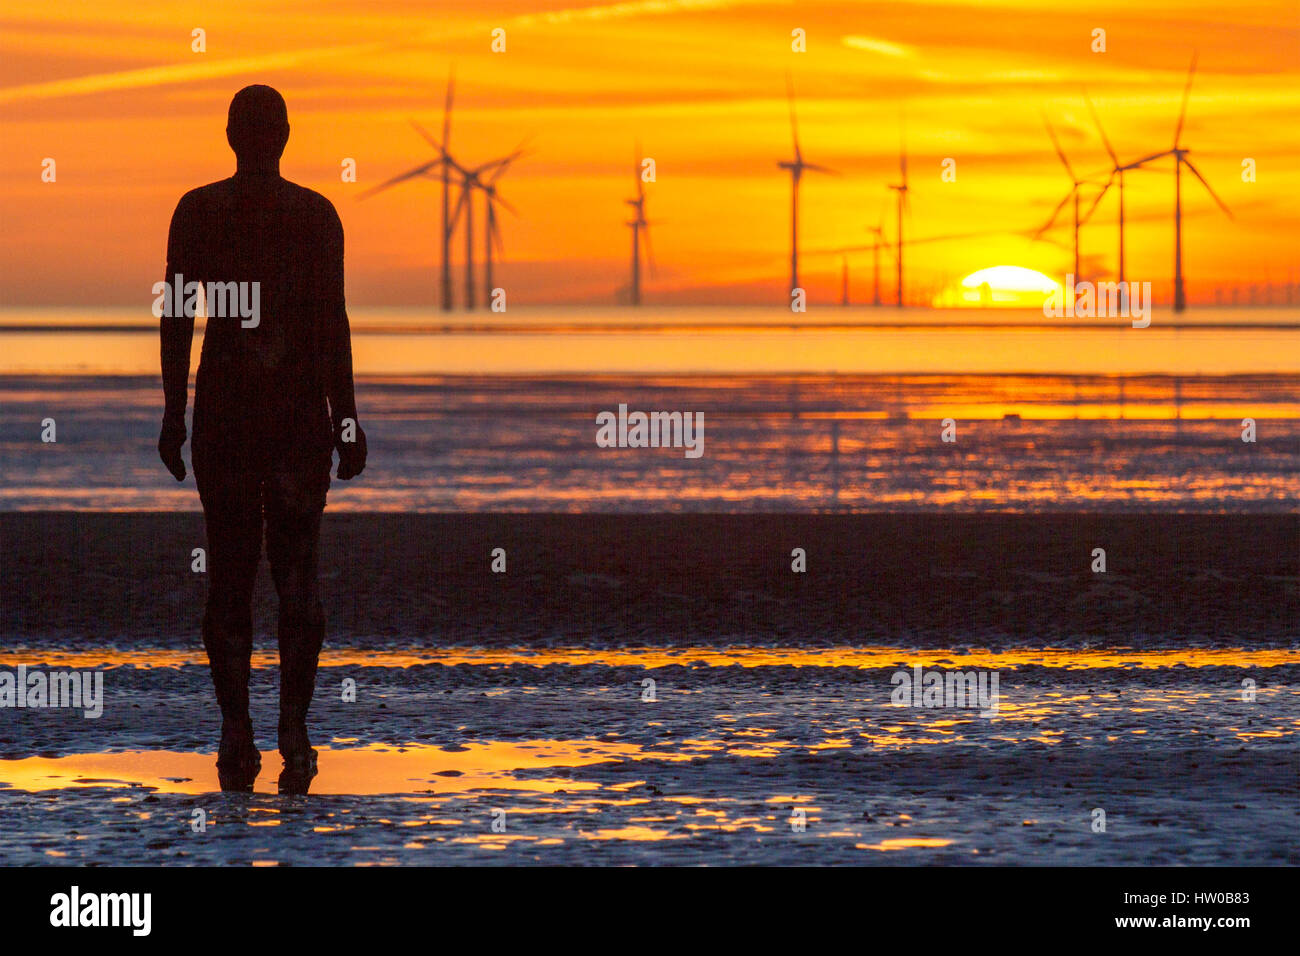 Sunset over Crosby, Liverpool. 15th March 2017.  After a beautiful, warm & sunny spring day, the sun sets over the Burbo Bank wind farm off the Liverpool coastline.  The Burbo Bank Offshore Wind Farm is a 90 MW offshore wind farm located on the Burbo Flats in Liverpool Bay on the west coast of the UK in the Irish Sea.  A 25 turbine installation using Siemens Wind Power 3.6 MW turbines was constructed from 2005, and officially opened in 2007.  Credit: Cernan Elias/Alamy Live News Stock Photo